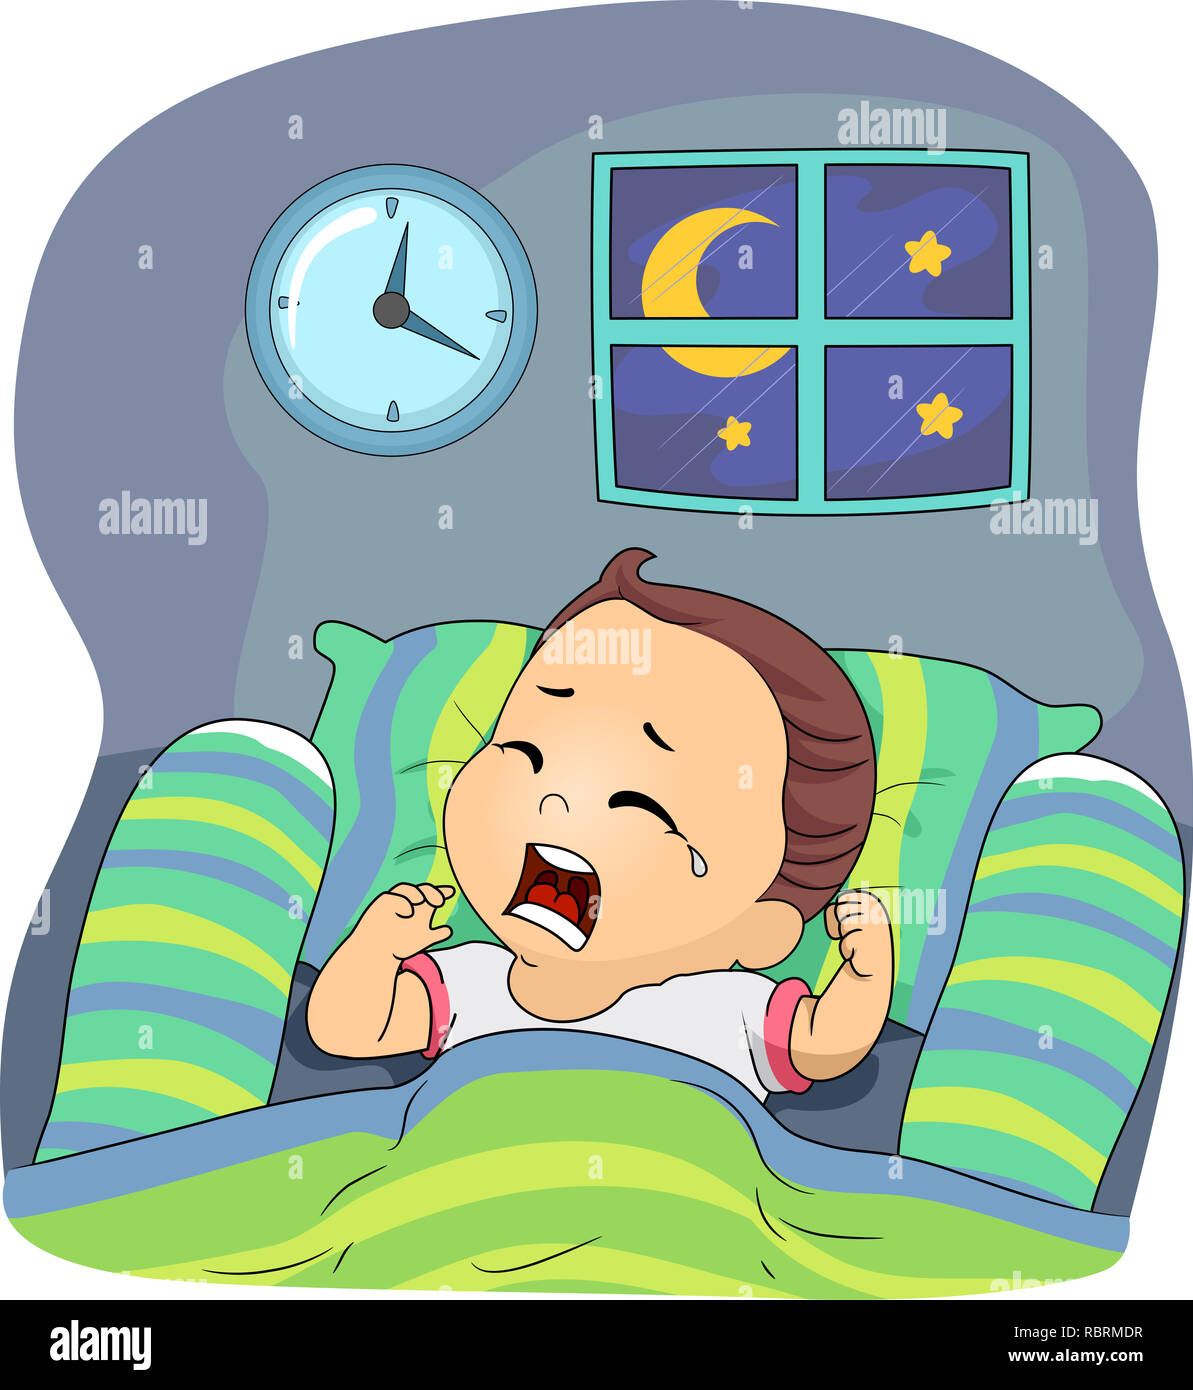 Illustration of a Kid Boy Toddler Crying After Waking Up at Night in Bed Stock Photo